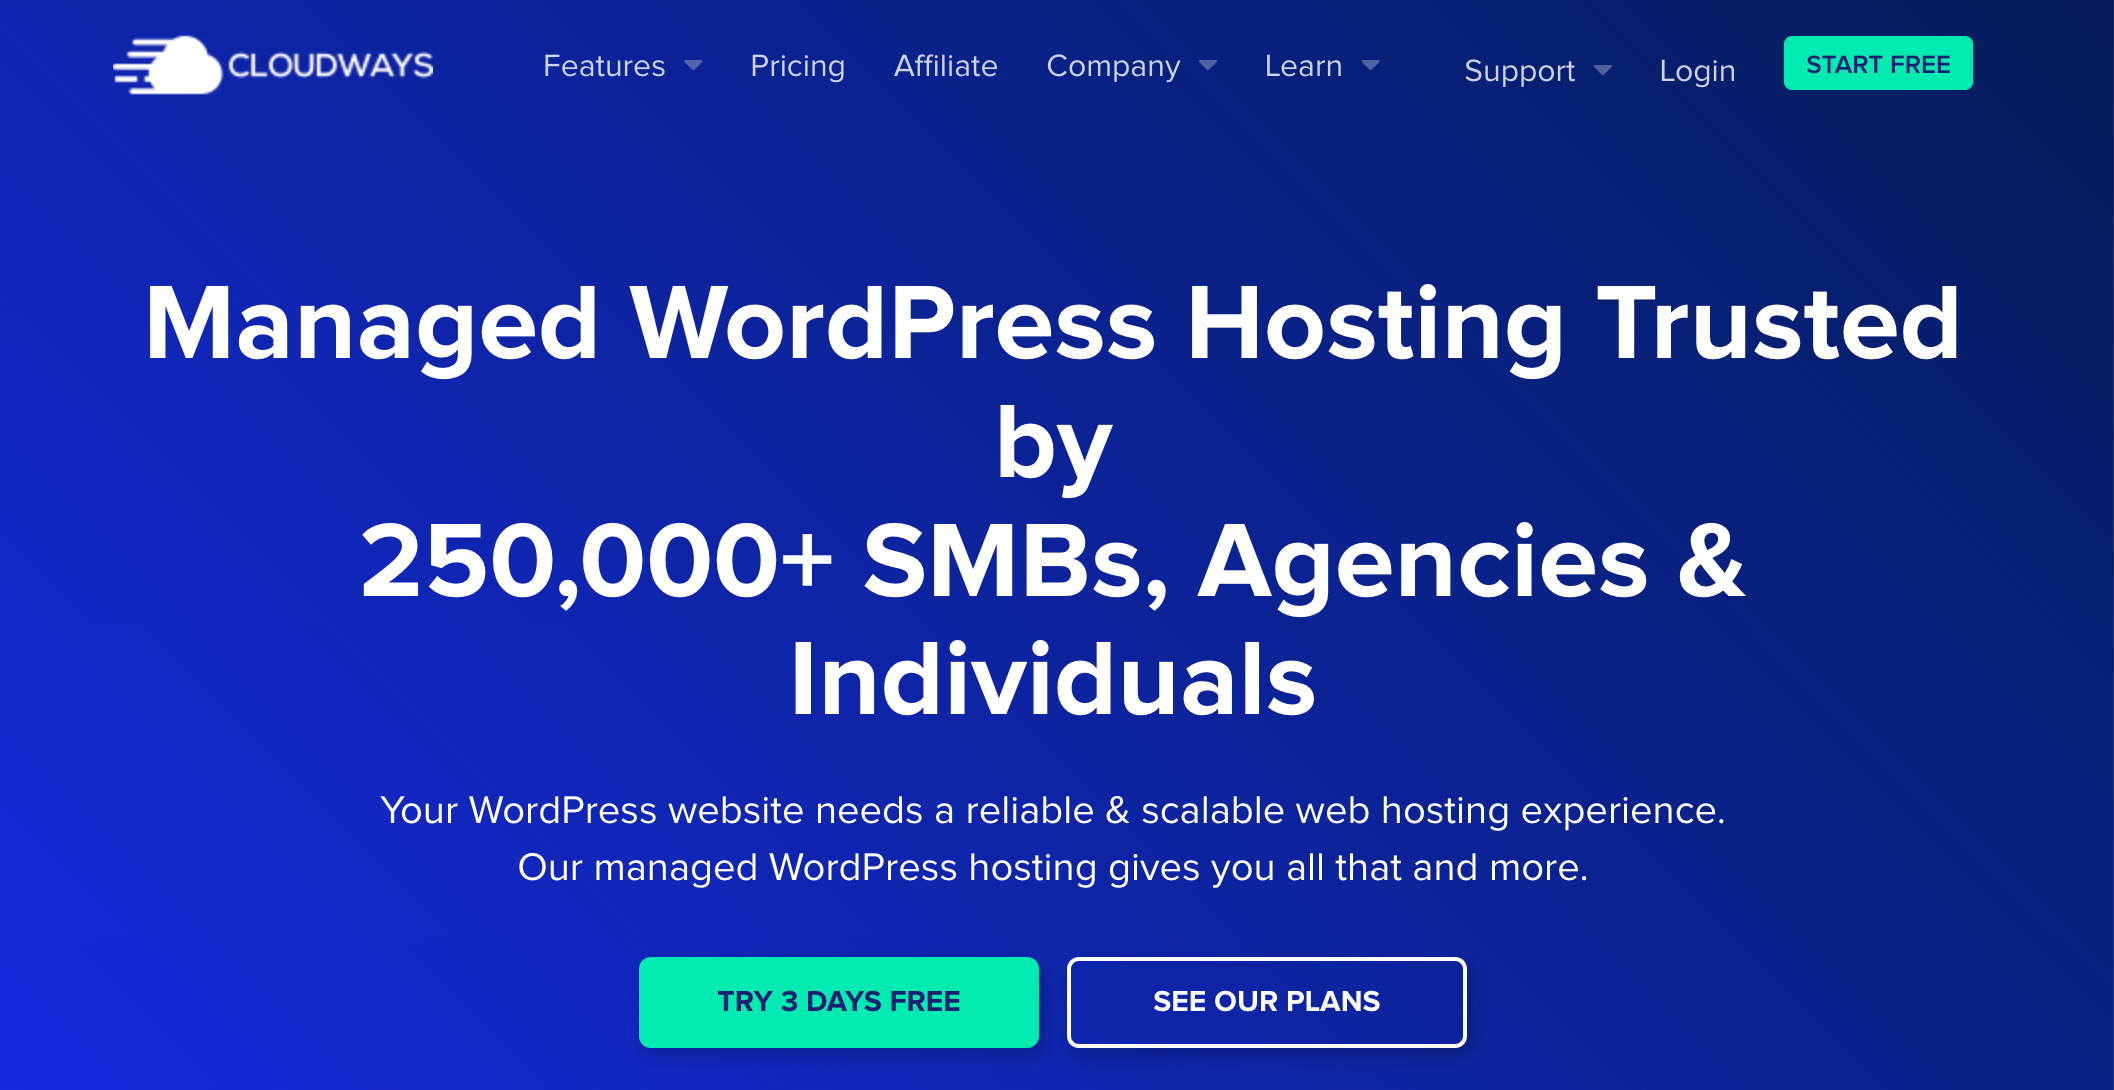 Cloudways is the FASTEST Hosting for Wordpress & usually the BEST Choice